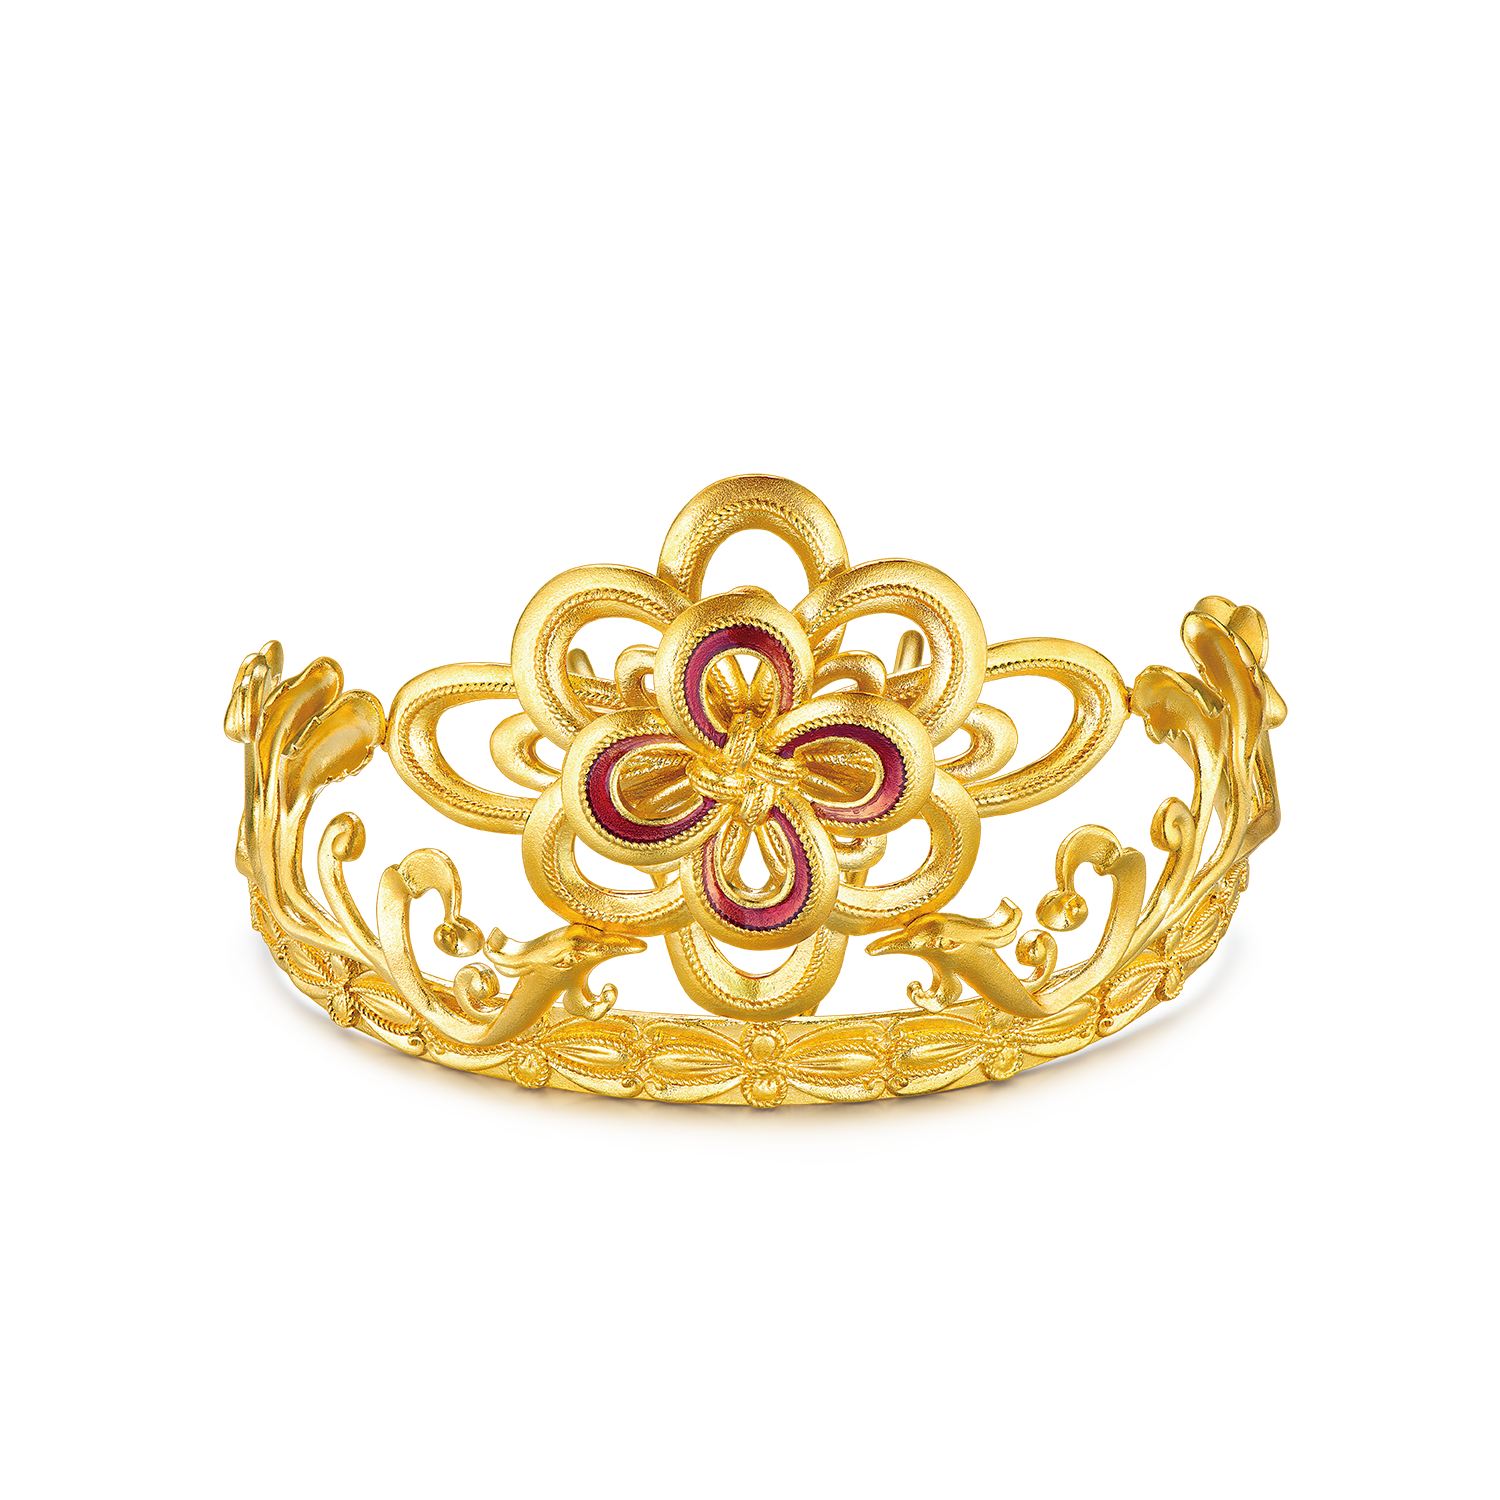 Heirloom Fortune Collection "Tie the Knot" Gold Crown 